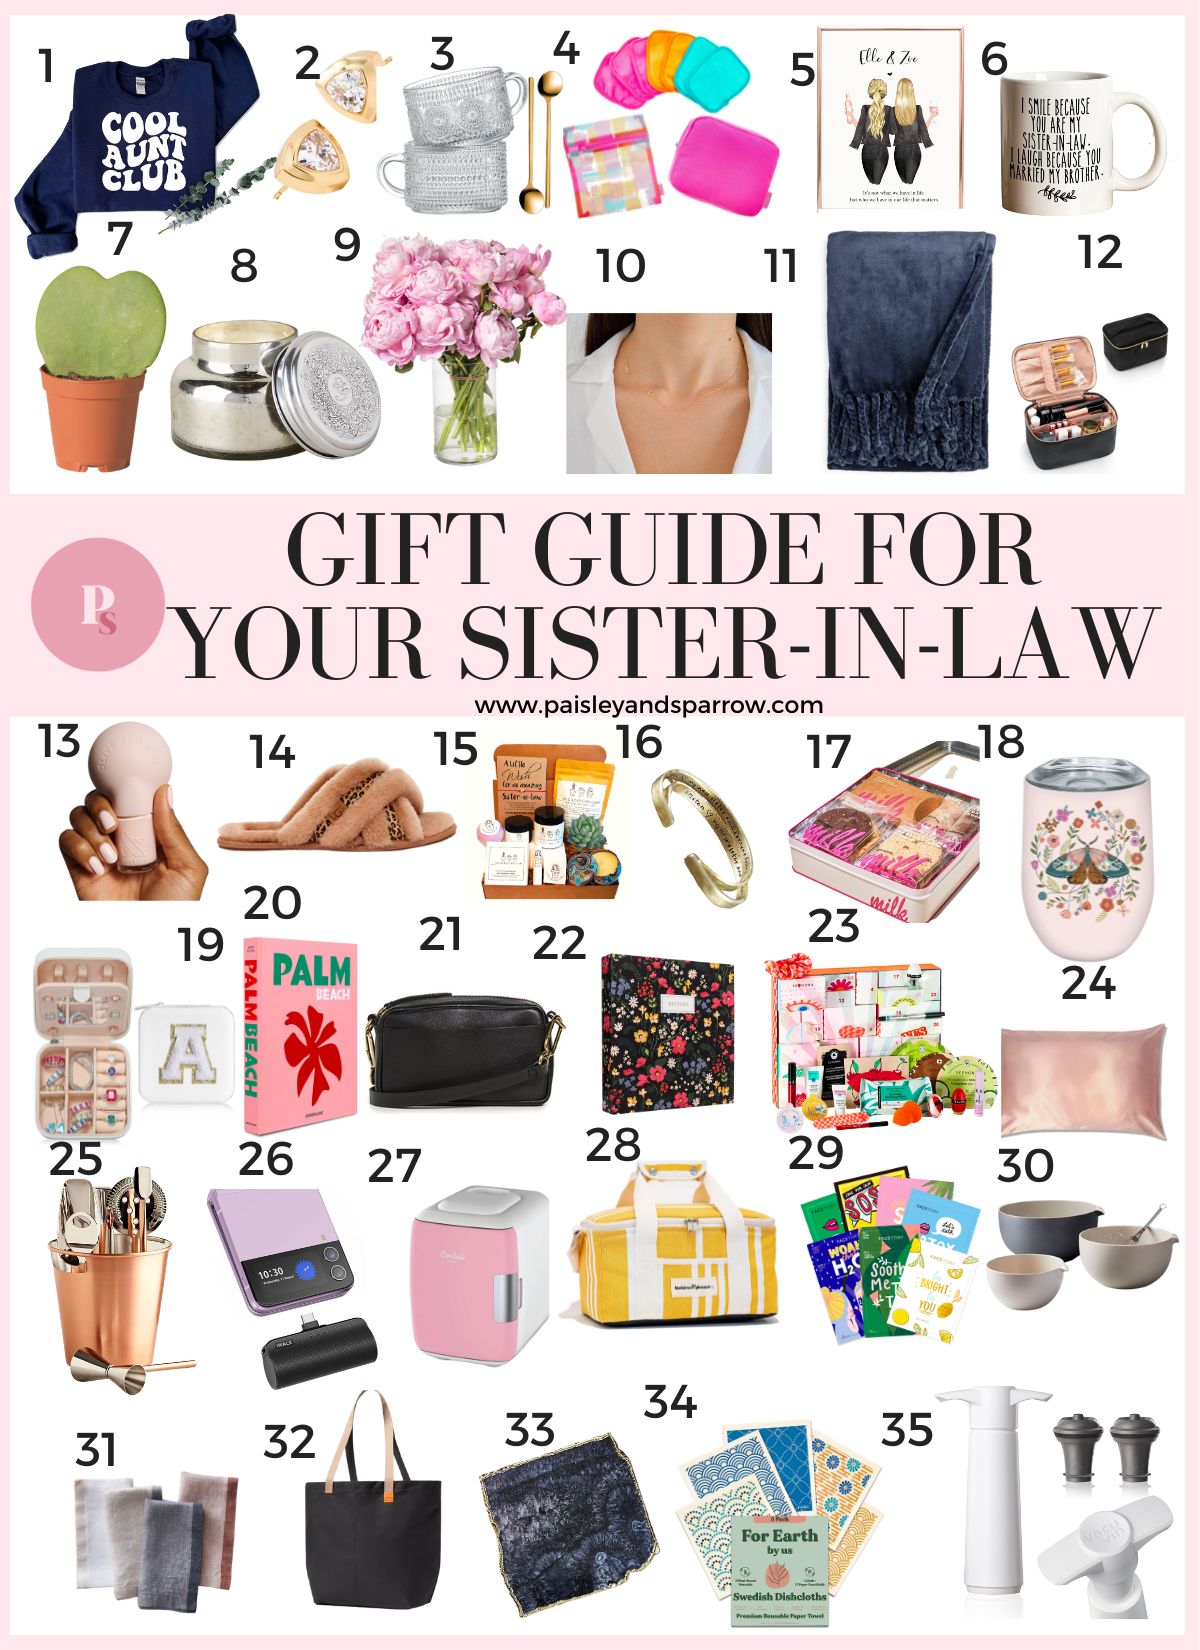 Best Big Brother or Big Sister Gift Ideas from a New Baby-chantamquoc.vn